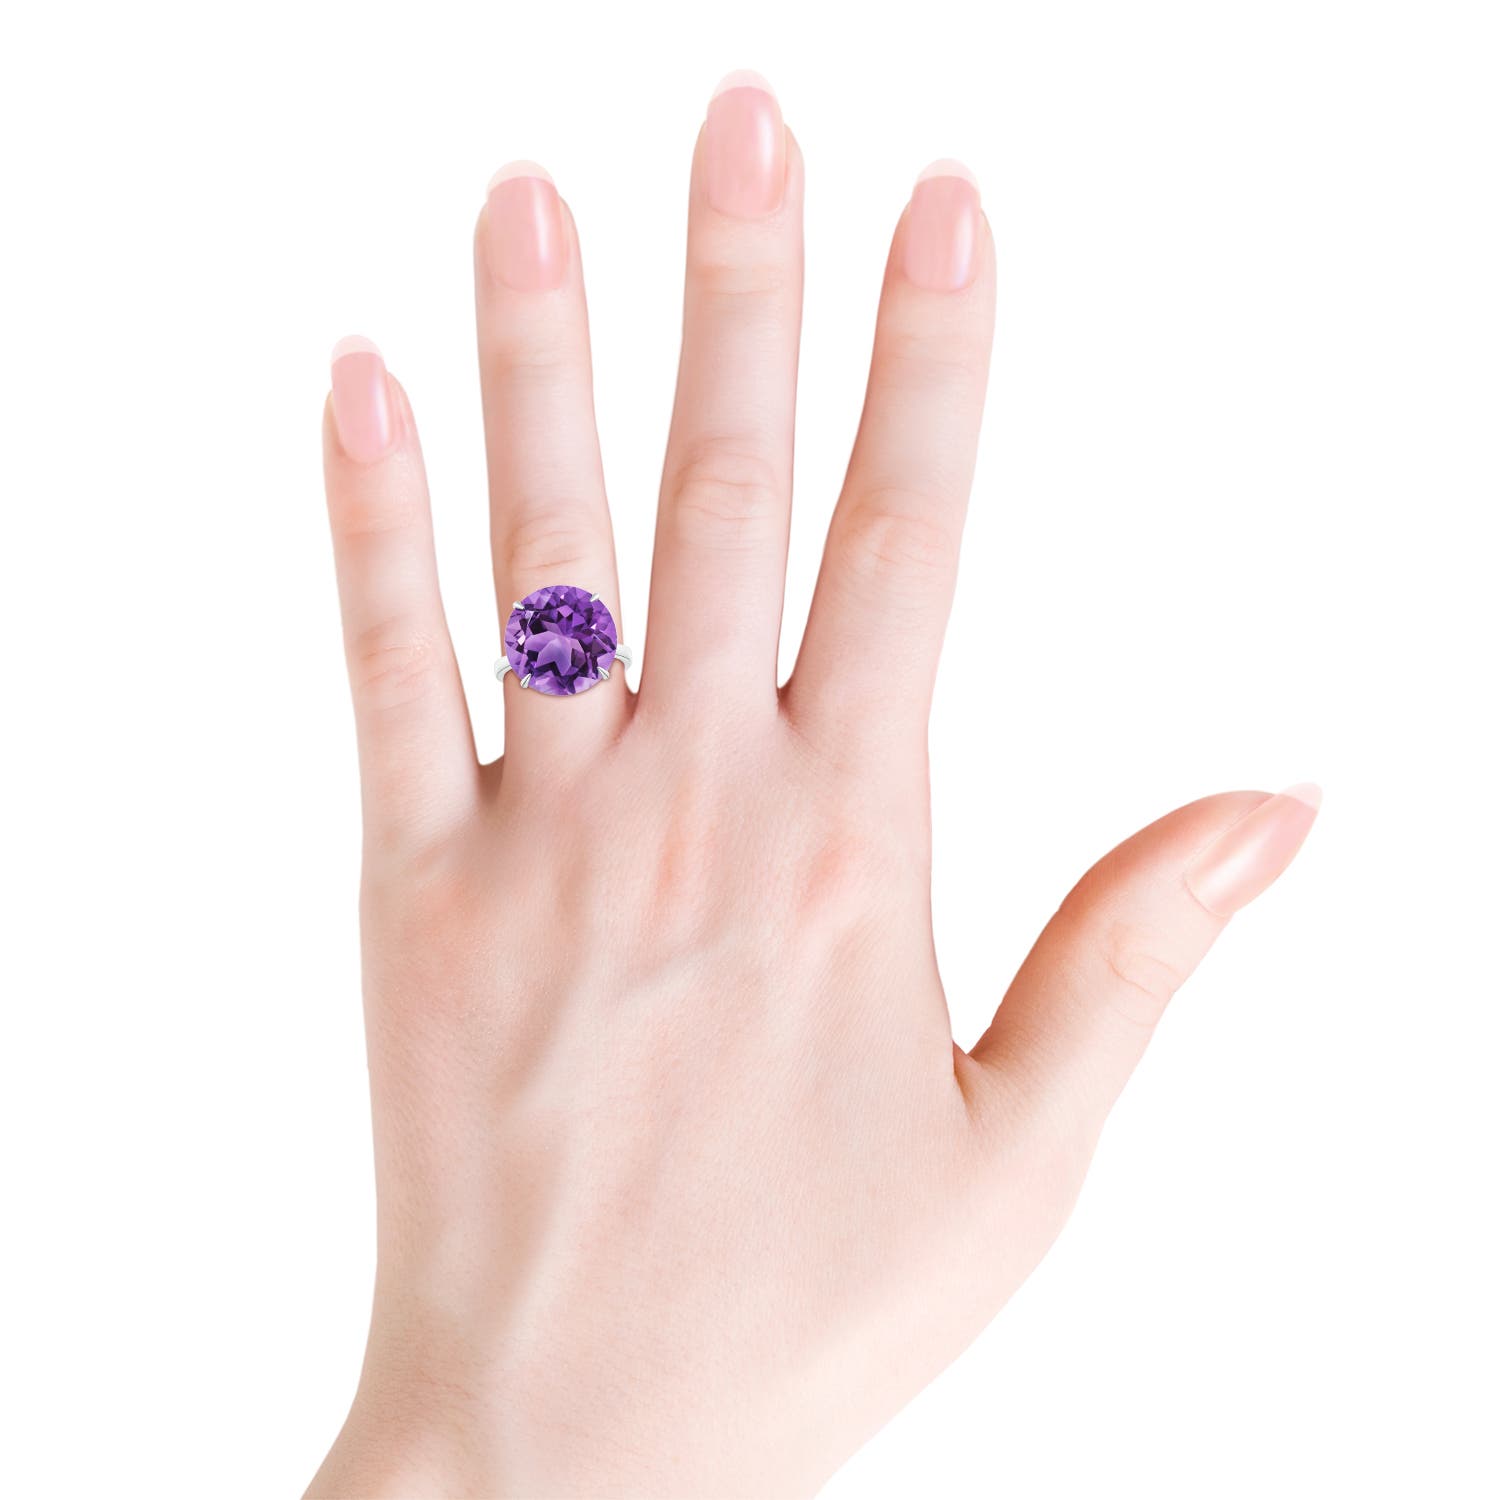 AA - Amethyst / 11 CT / 14 KT White Gold